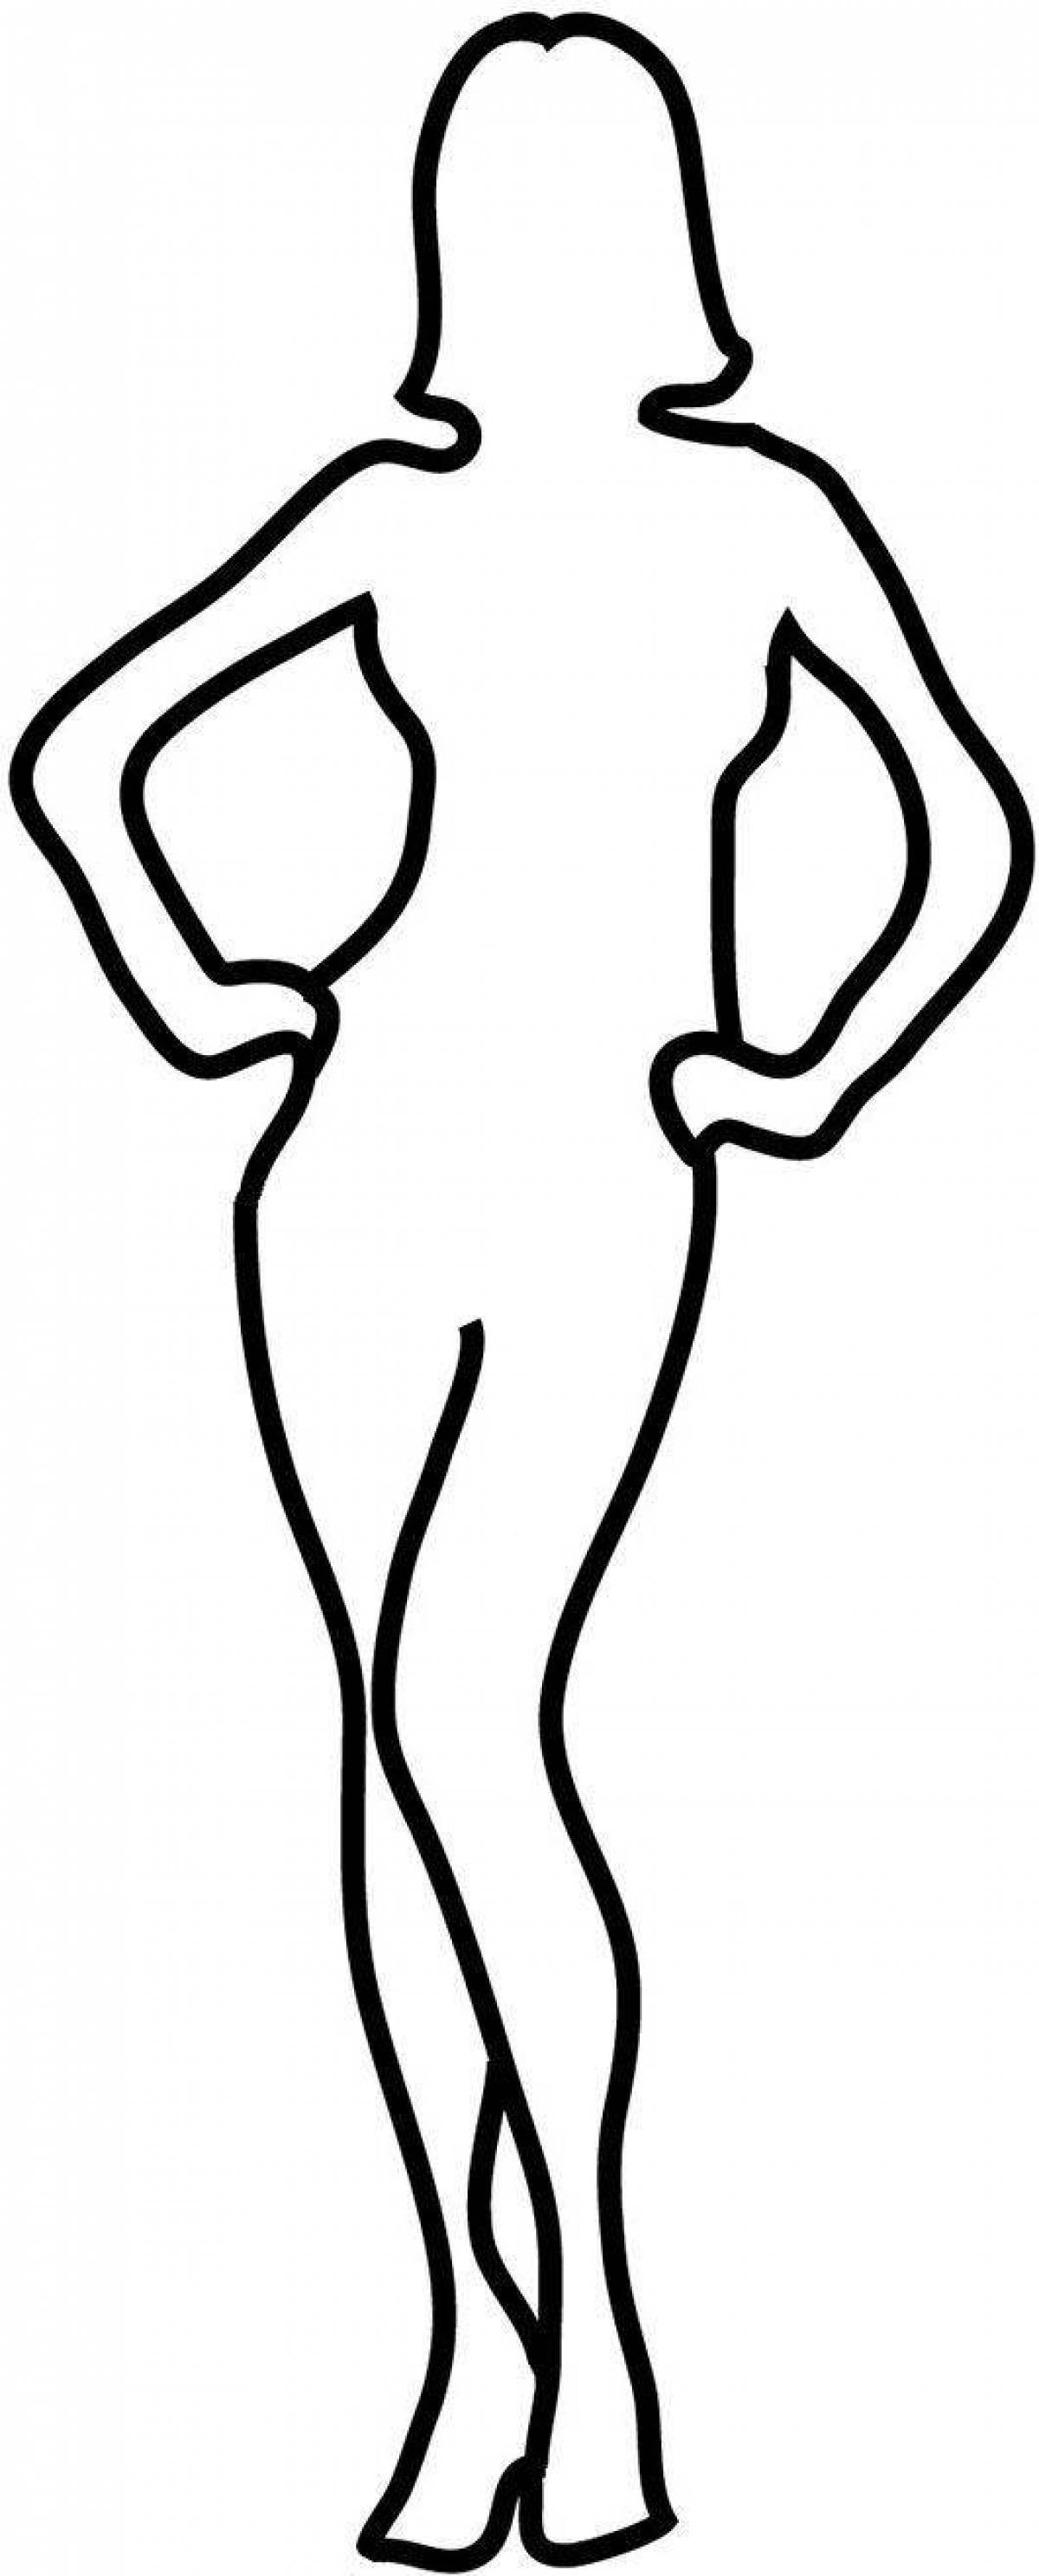 Journey body coloring page